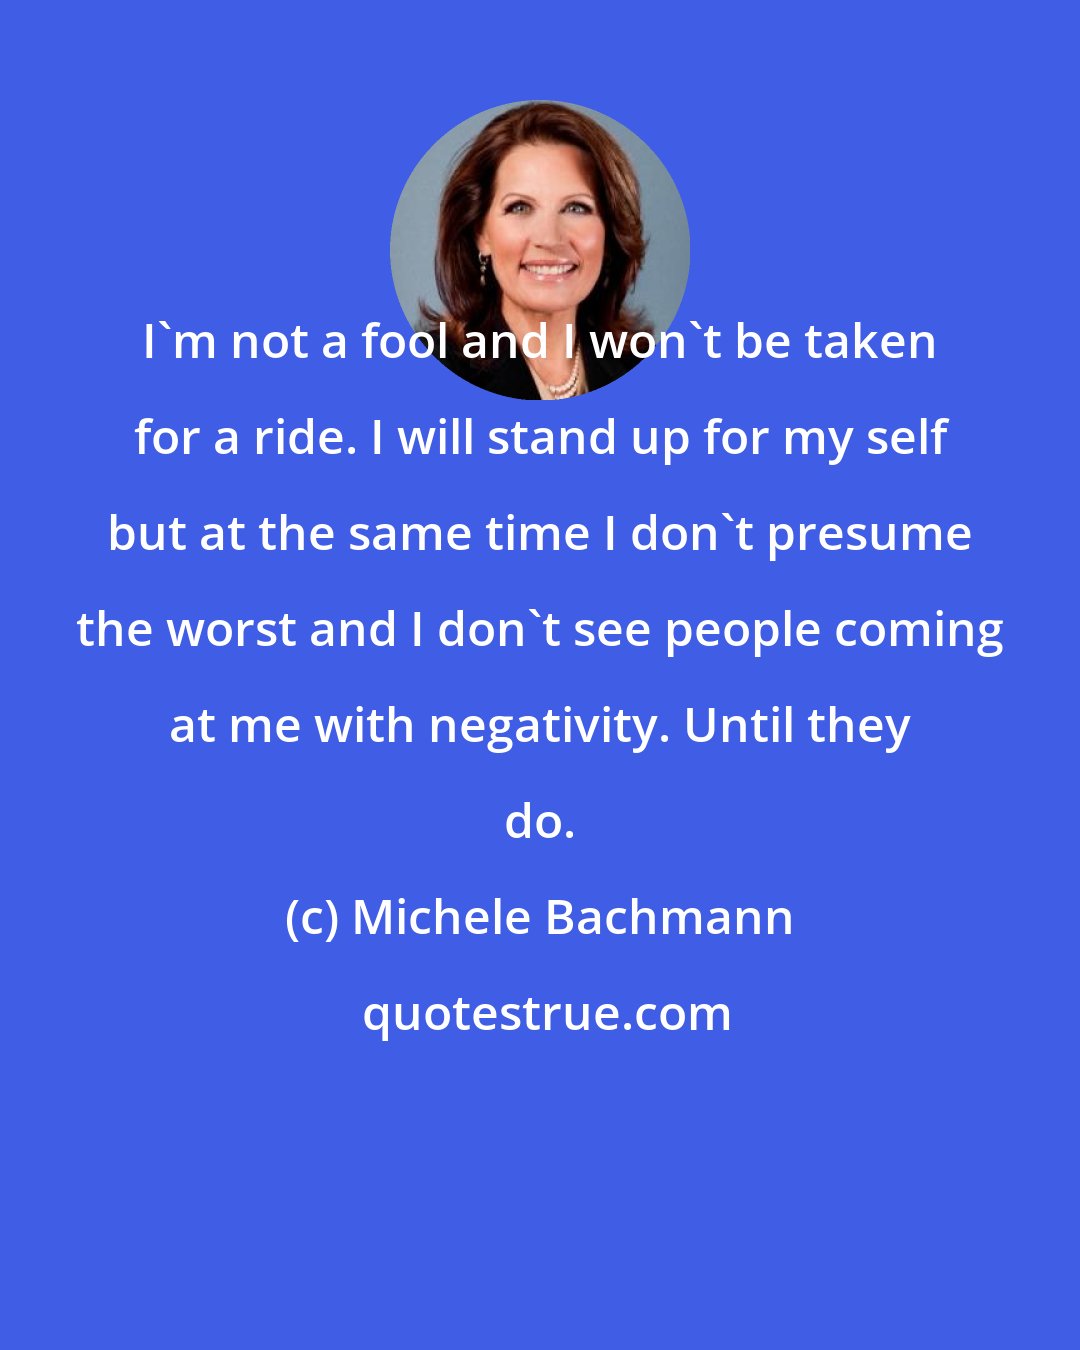 Michele Bachmann: I'm not a fool and I won't be taken for a ride. I will stand up for my self but at the same time I don't presume the worst and I don't see people coming at me with negativity. Until they do.